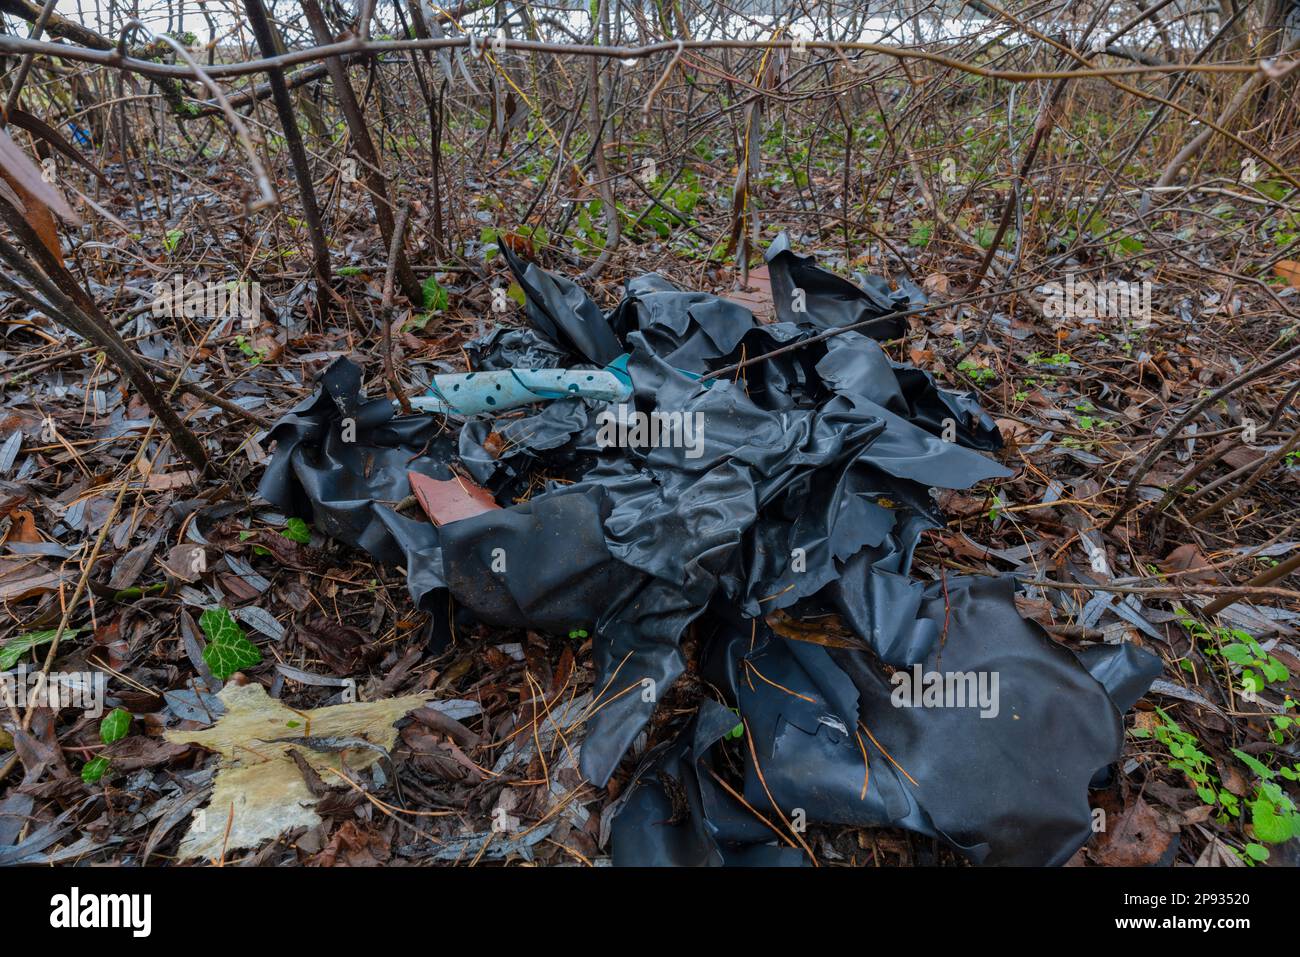 Illegal waste dumped in the forest in Germany, broken garbage bags, pollution Stock Photo